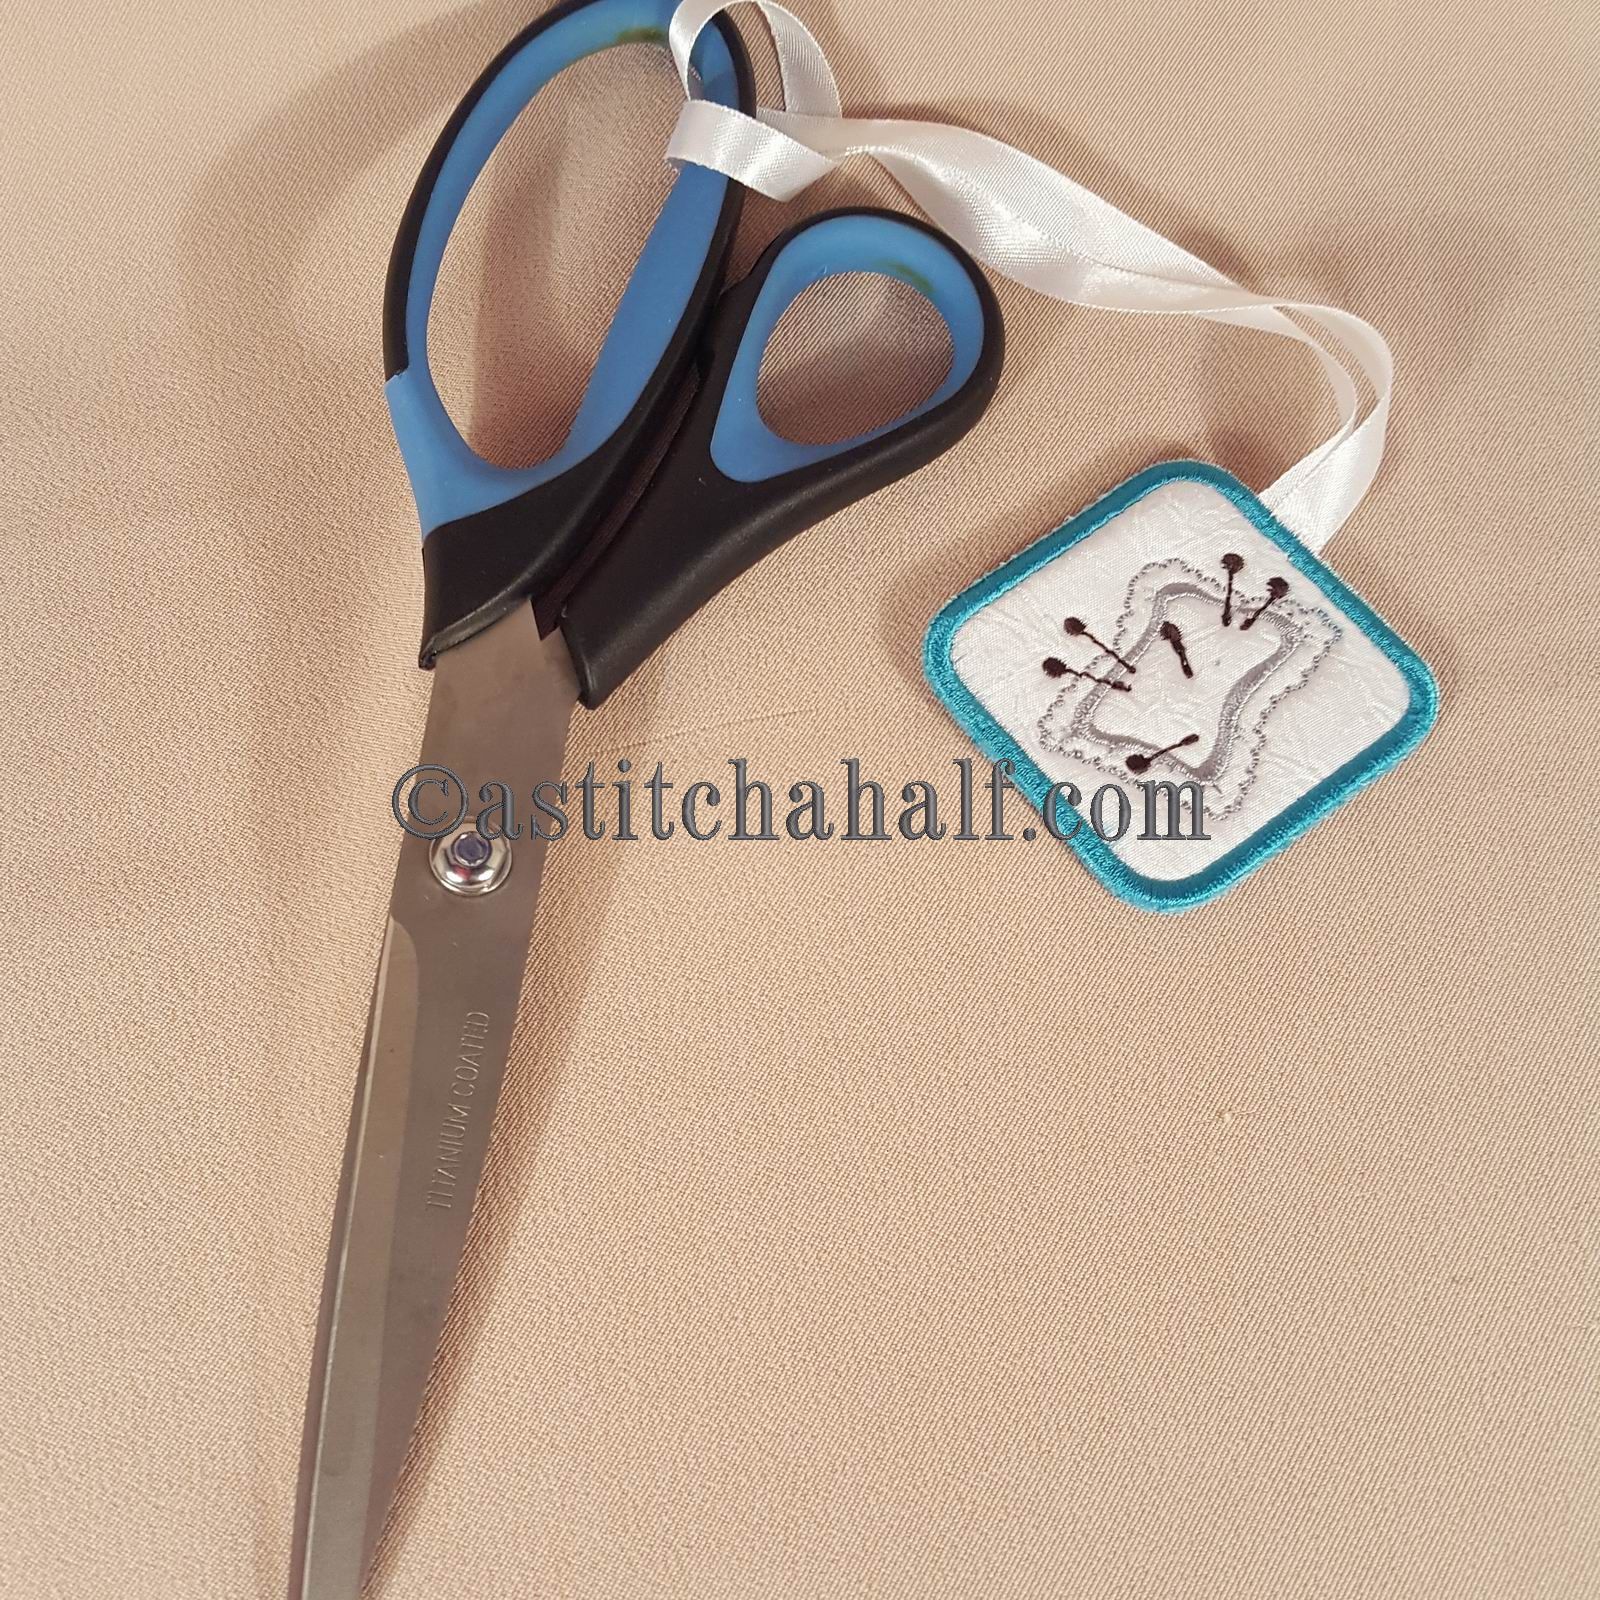 Sewing Scissor Cases with Fob - aStitch aHalf